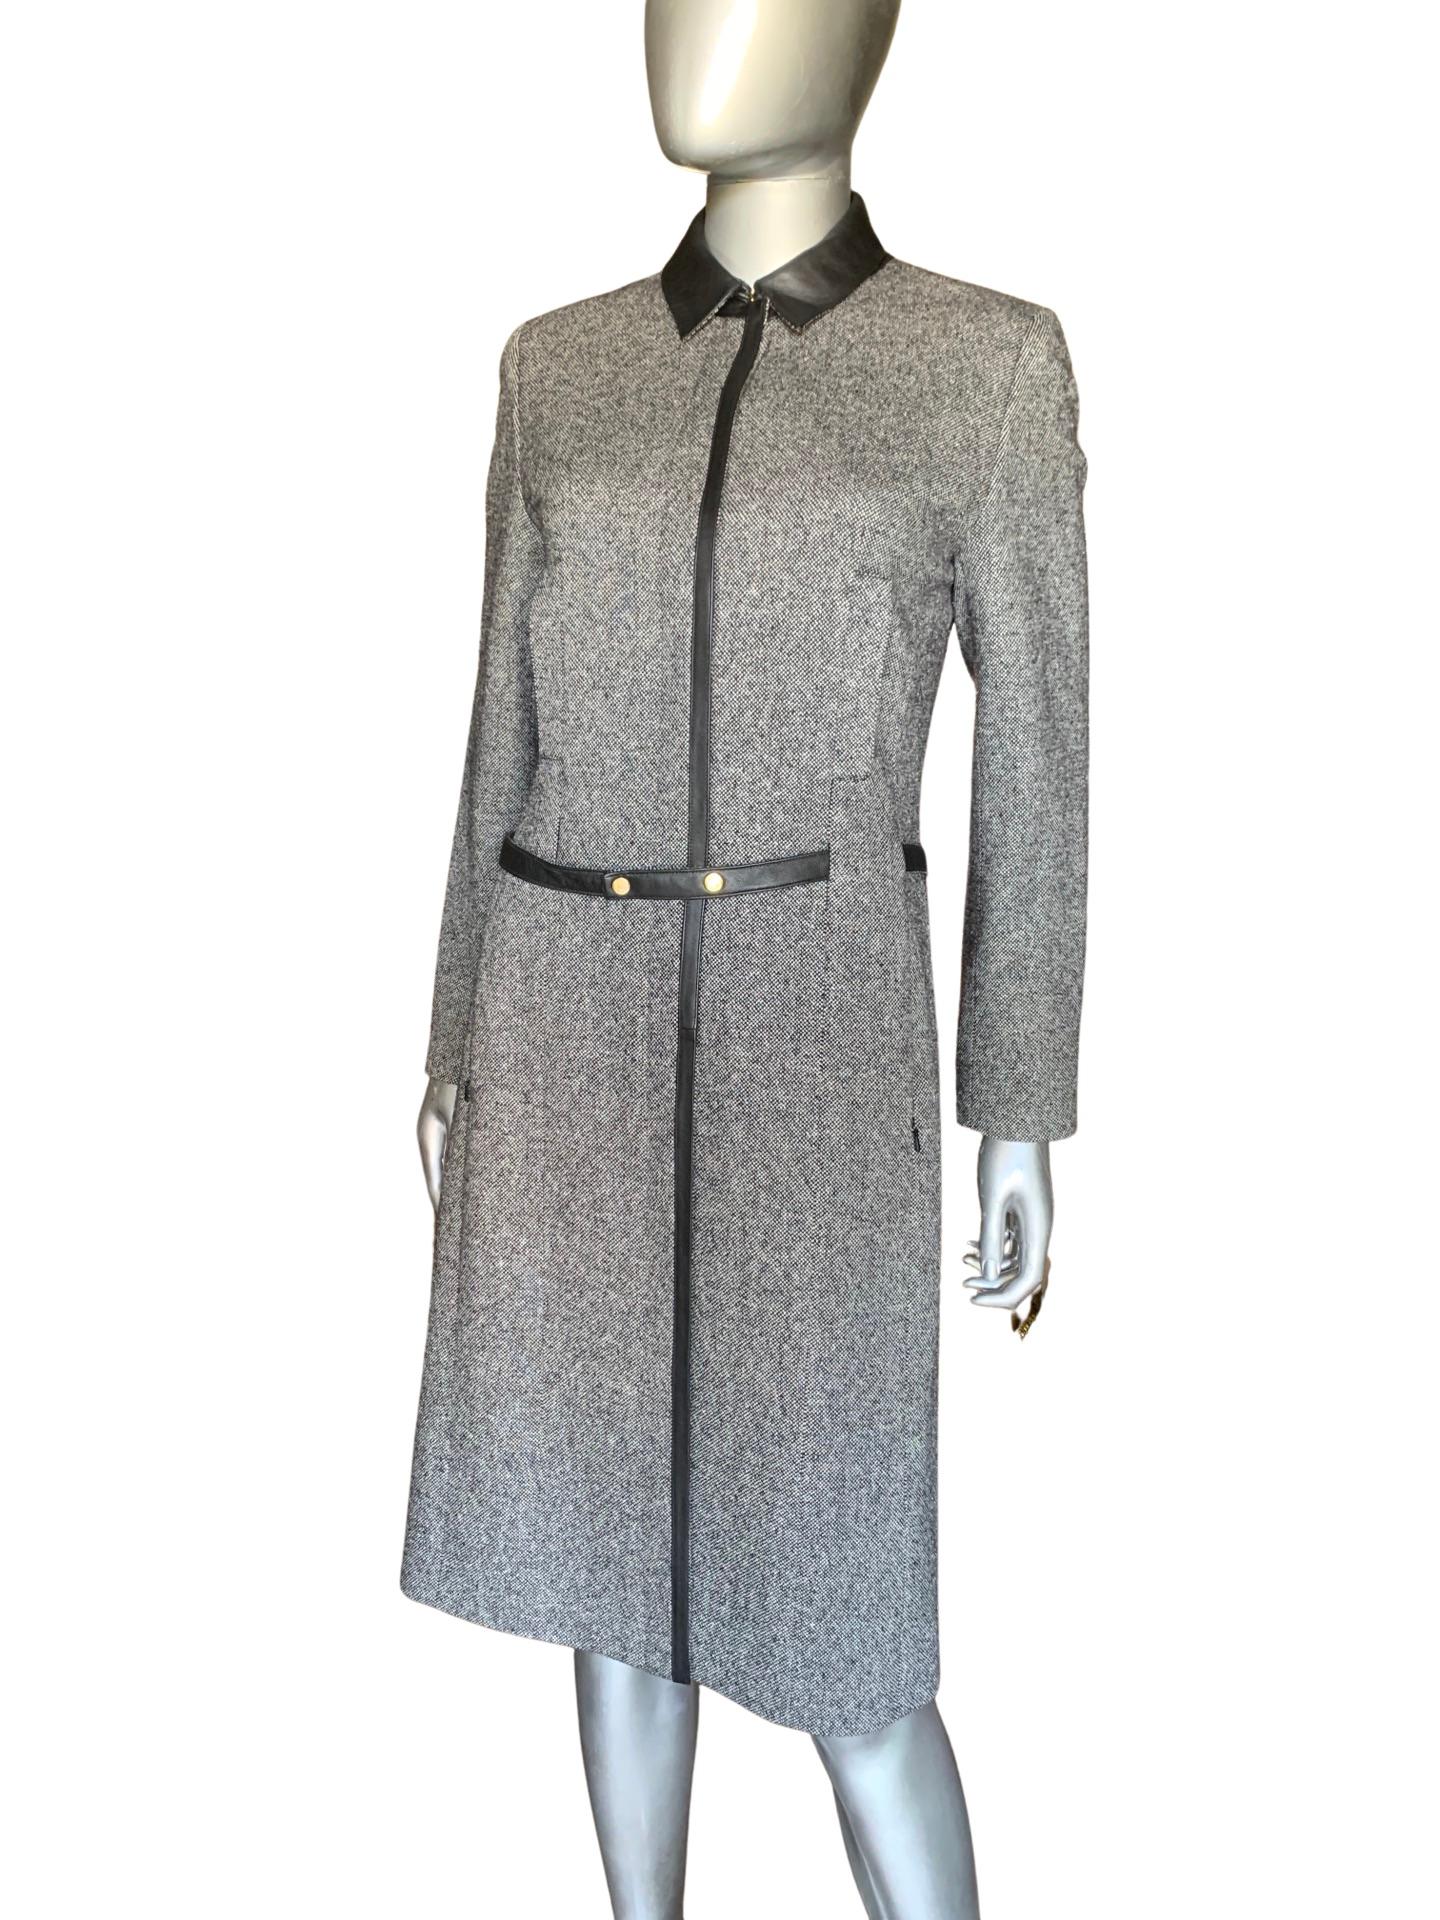 Is it a coat? Is it a dress? Well, it's both... so we call it a Coat Dress. A beautifully made garment by Worth, New York. The fabric is a mid-weight (definatlly not heavy) black and white tweed in silk/wool. The slim fit Coat Dress is modern